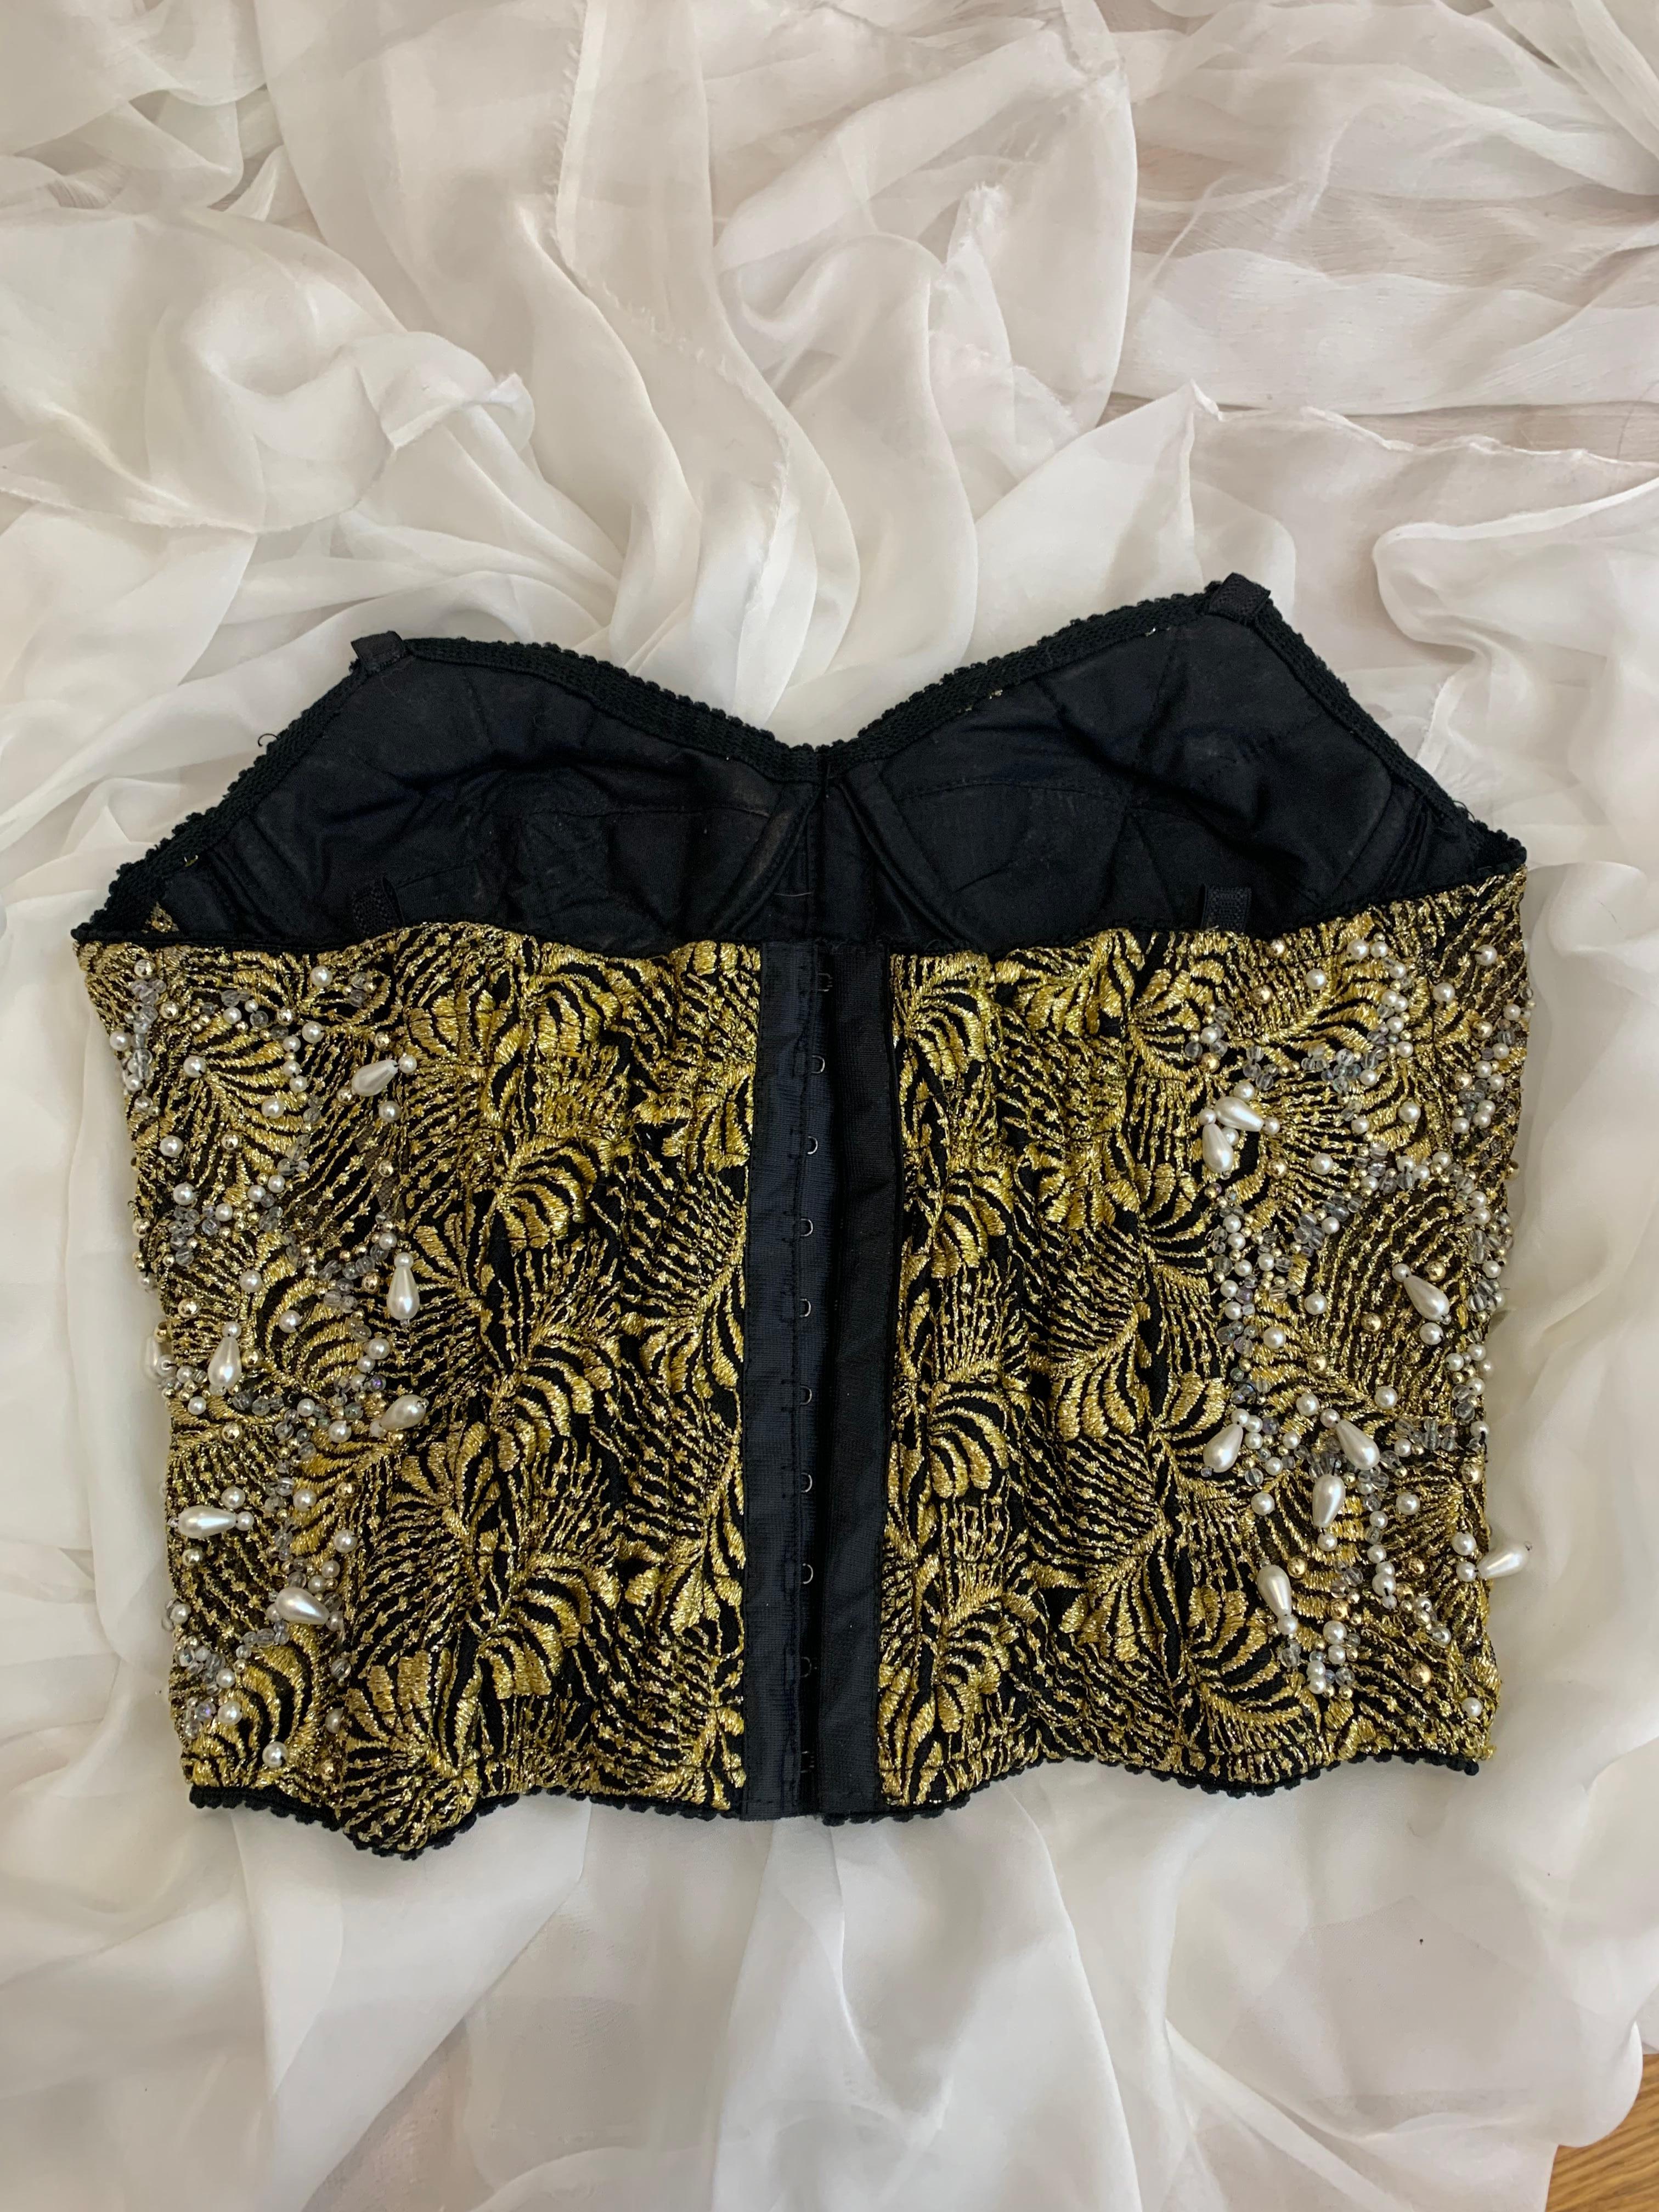 Super Rare Dolce Gabbana 1990’s beaded pearls gold and black corset top 

Good vintage condition with normal wear. No straps. There are hoops for straps so you can put any straps you want 

There is no size label. Fits like S and best for A-B cup.